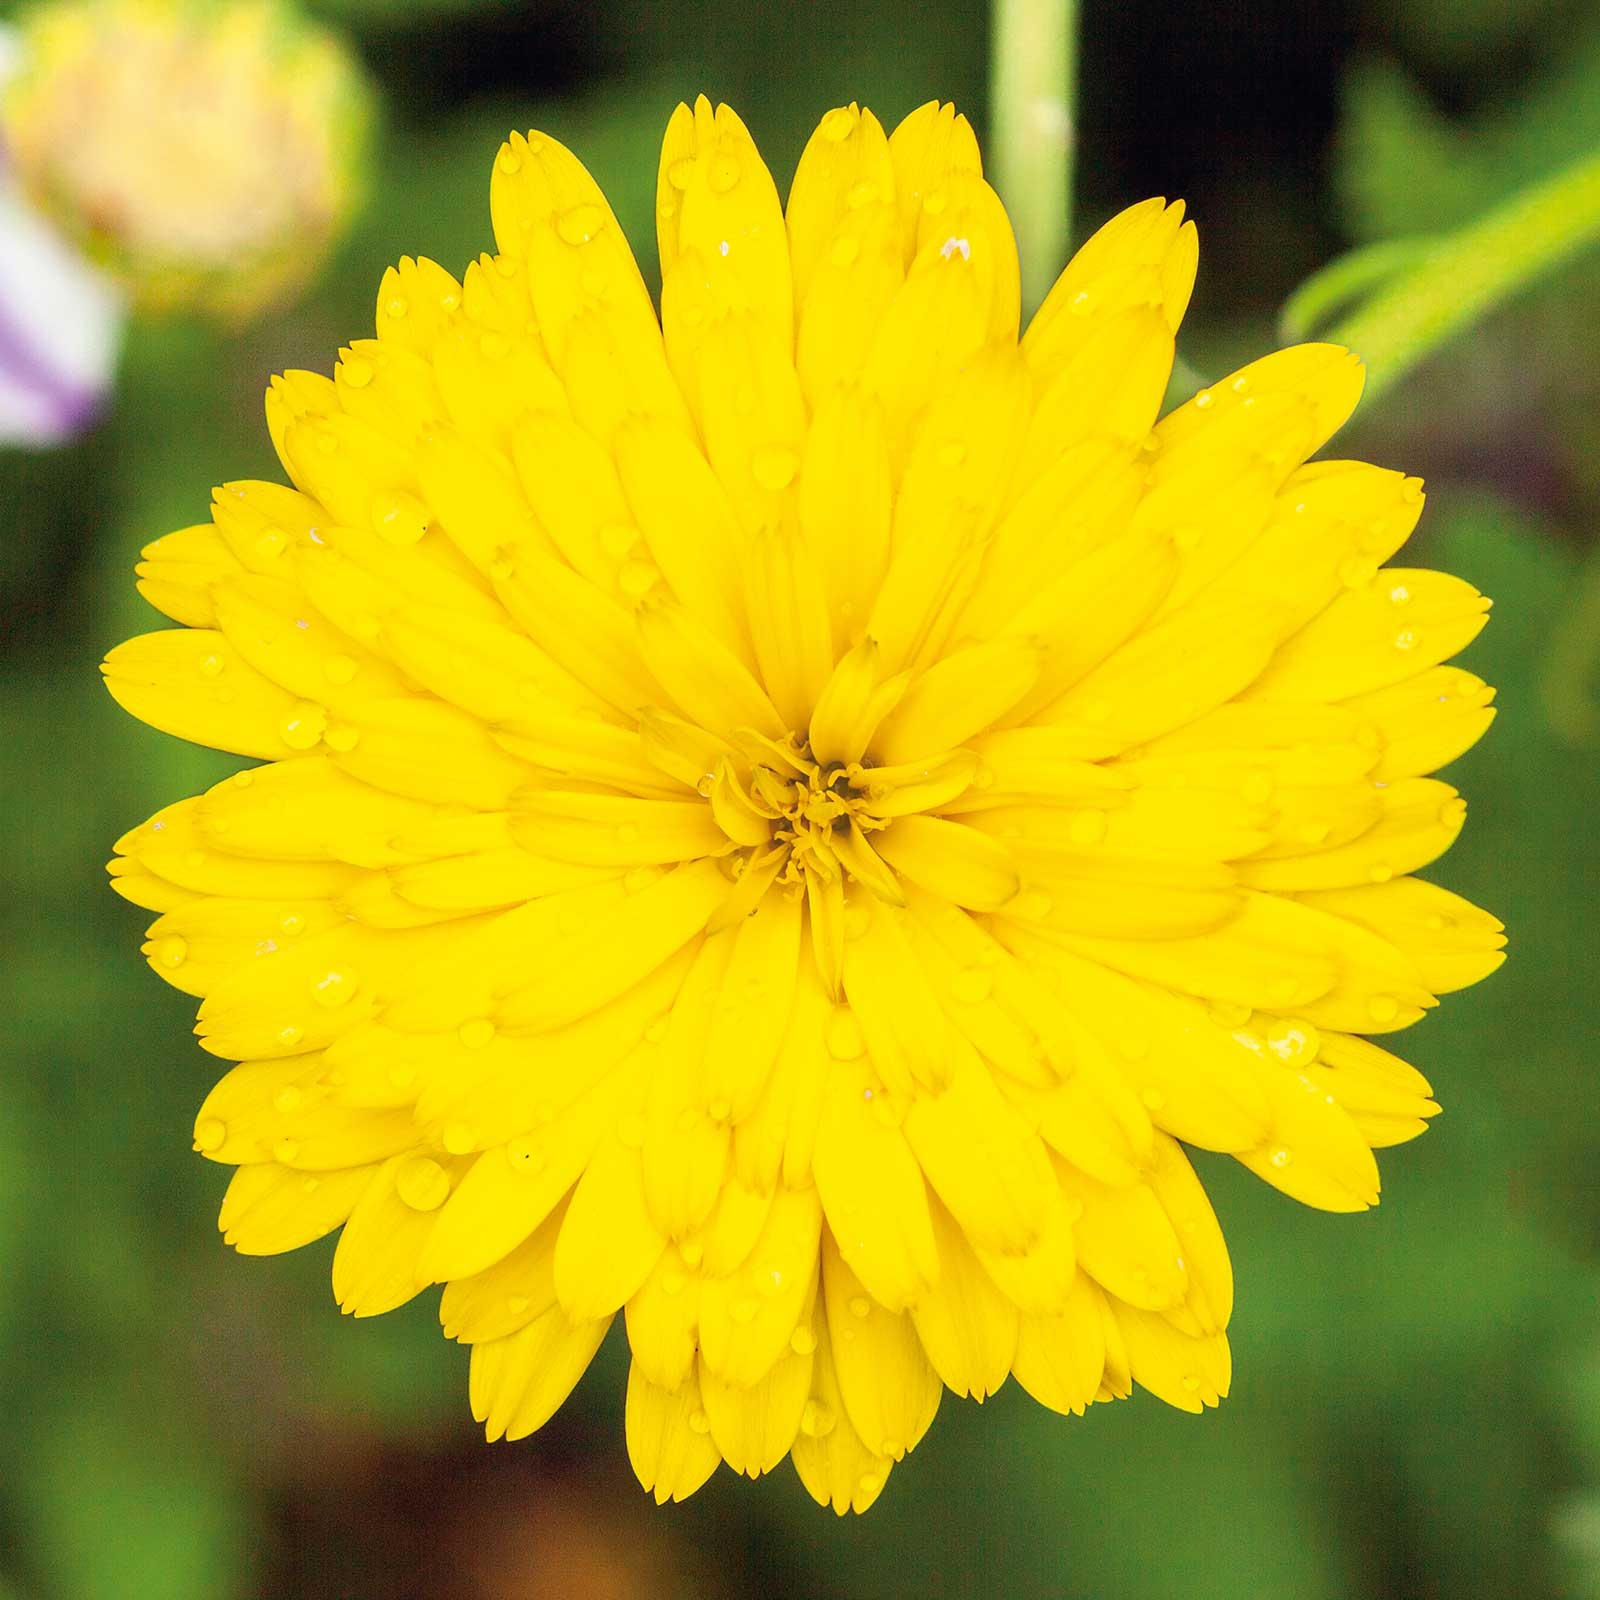 Yellow Chrysanthemum (Mums) Plant Seeds, Flower, Uses - PictureThis